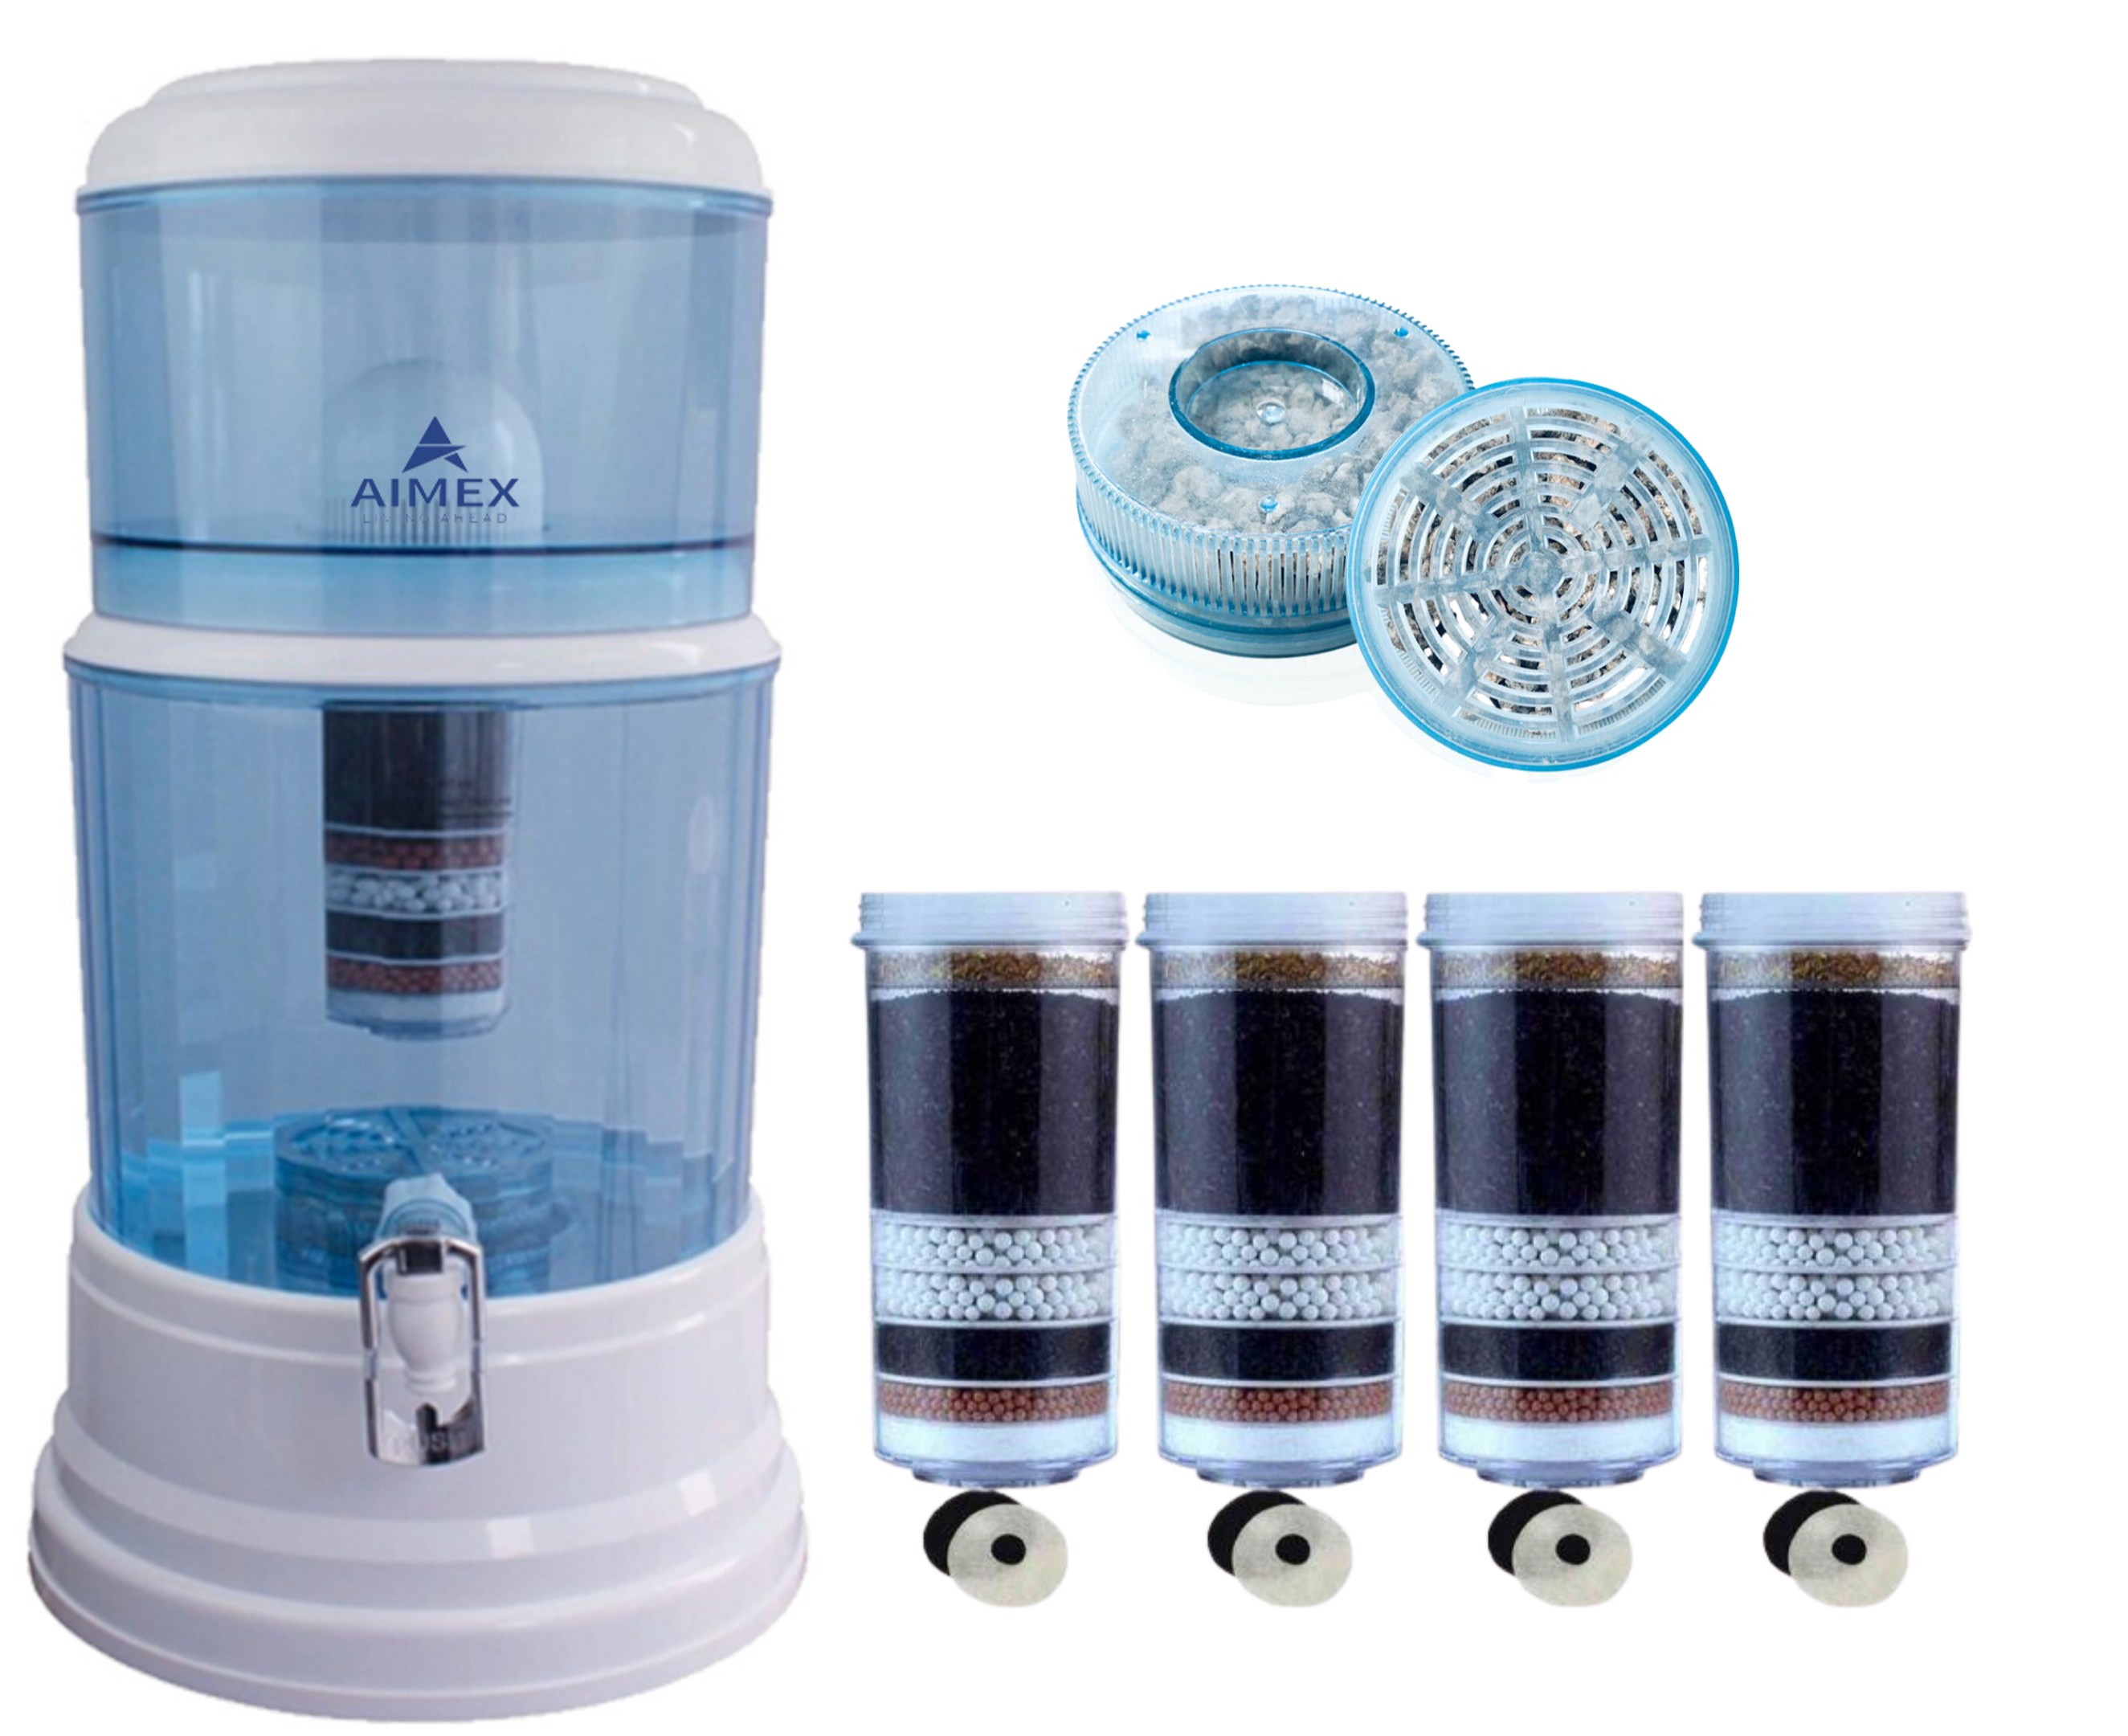 AIMEX WATER DISPENSER 20L BENCHTOP PURIFIER WITH 4 x 8 STAGE FLUORIDE REMOVAL WATER FILTERS